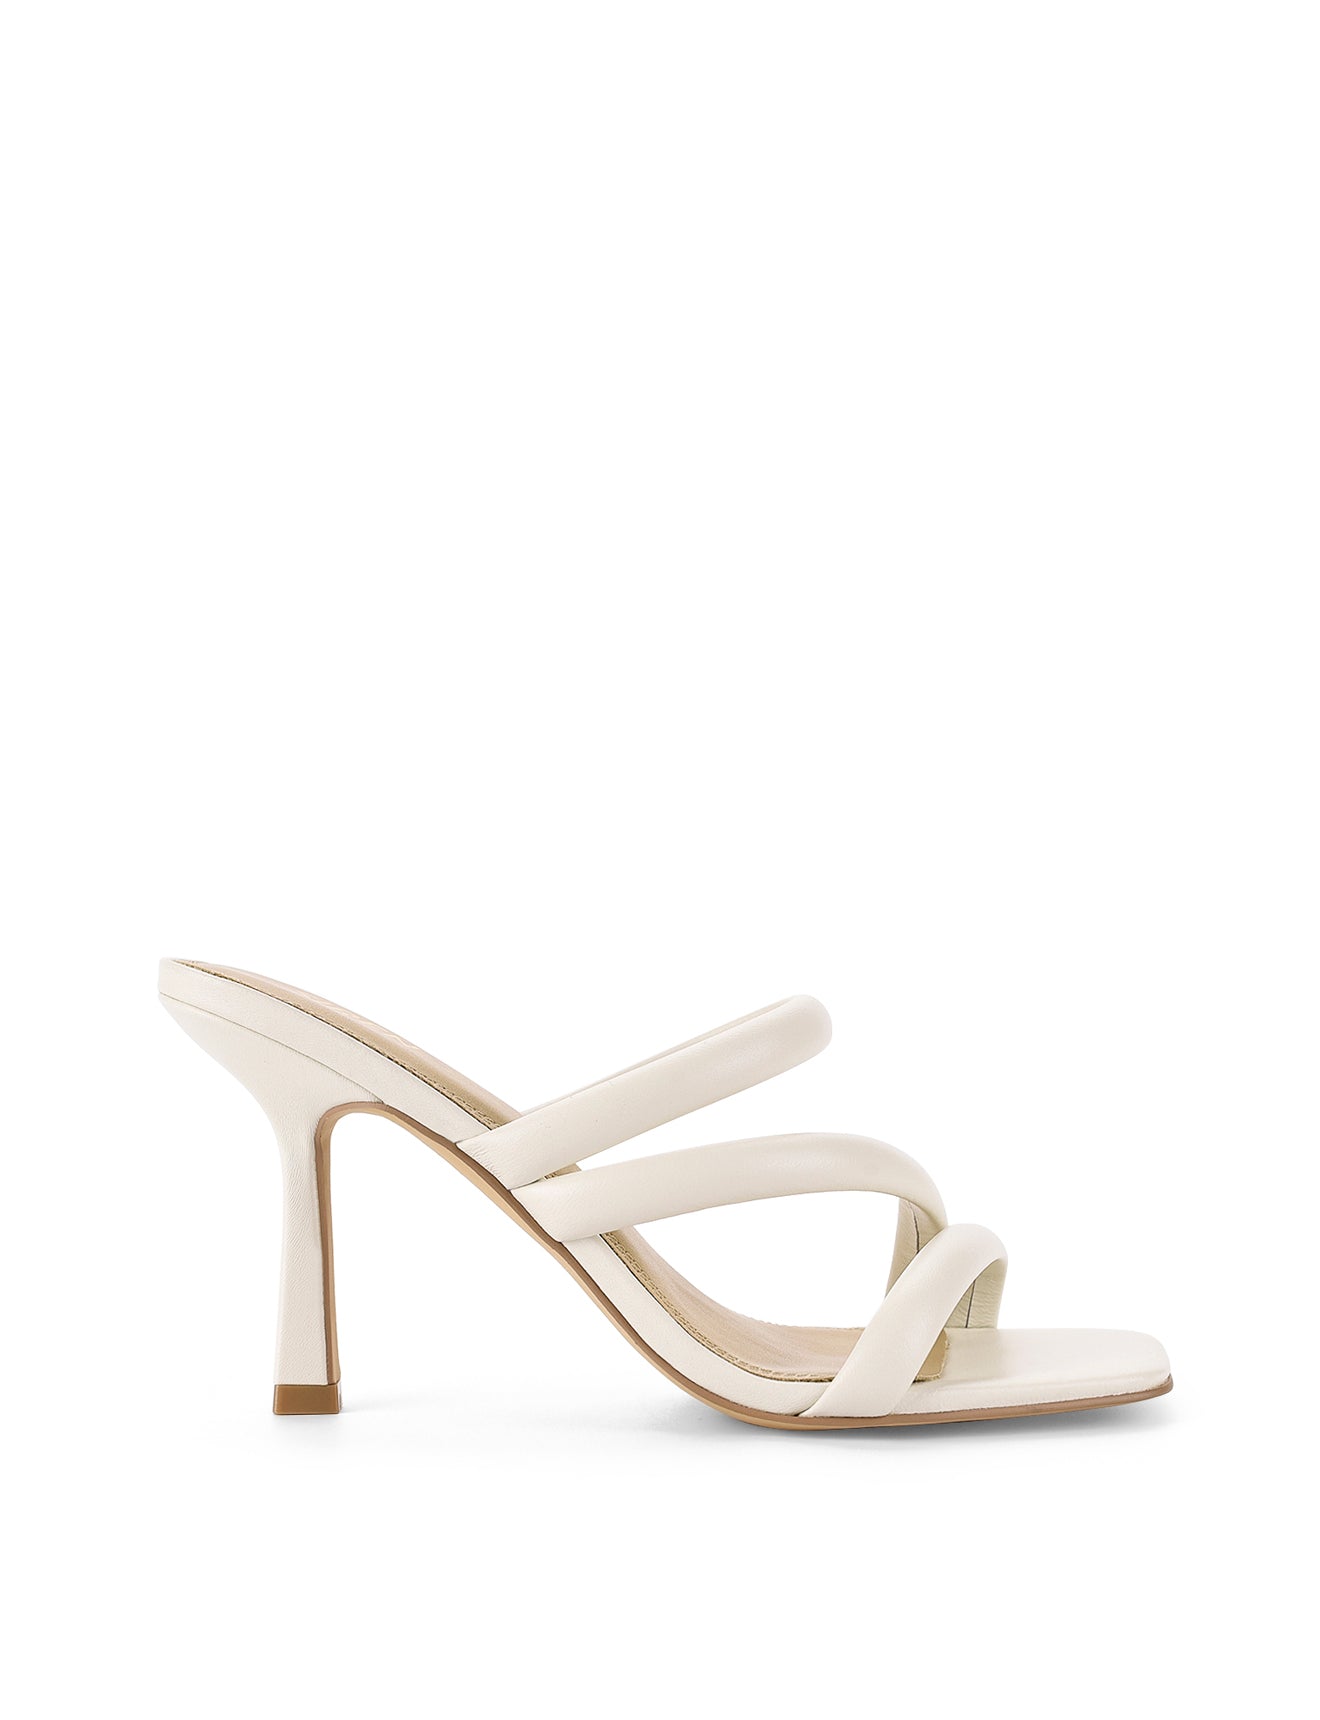 Spence Heeled Sandals - Chalk Leather